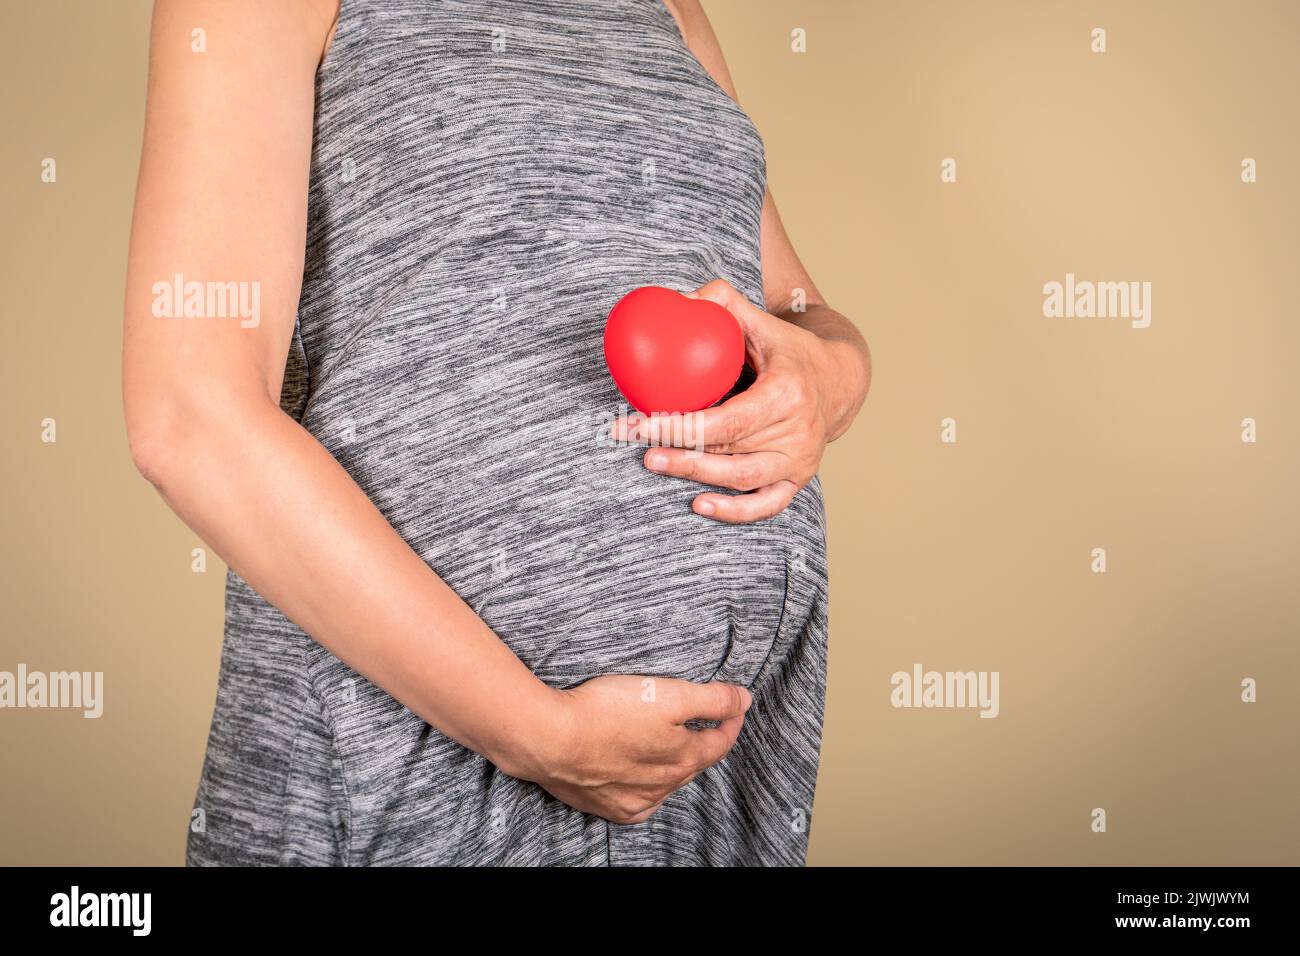 Pregnant woman with a red rubber heart in her hand. Love and family concept. Stock Photo